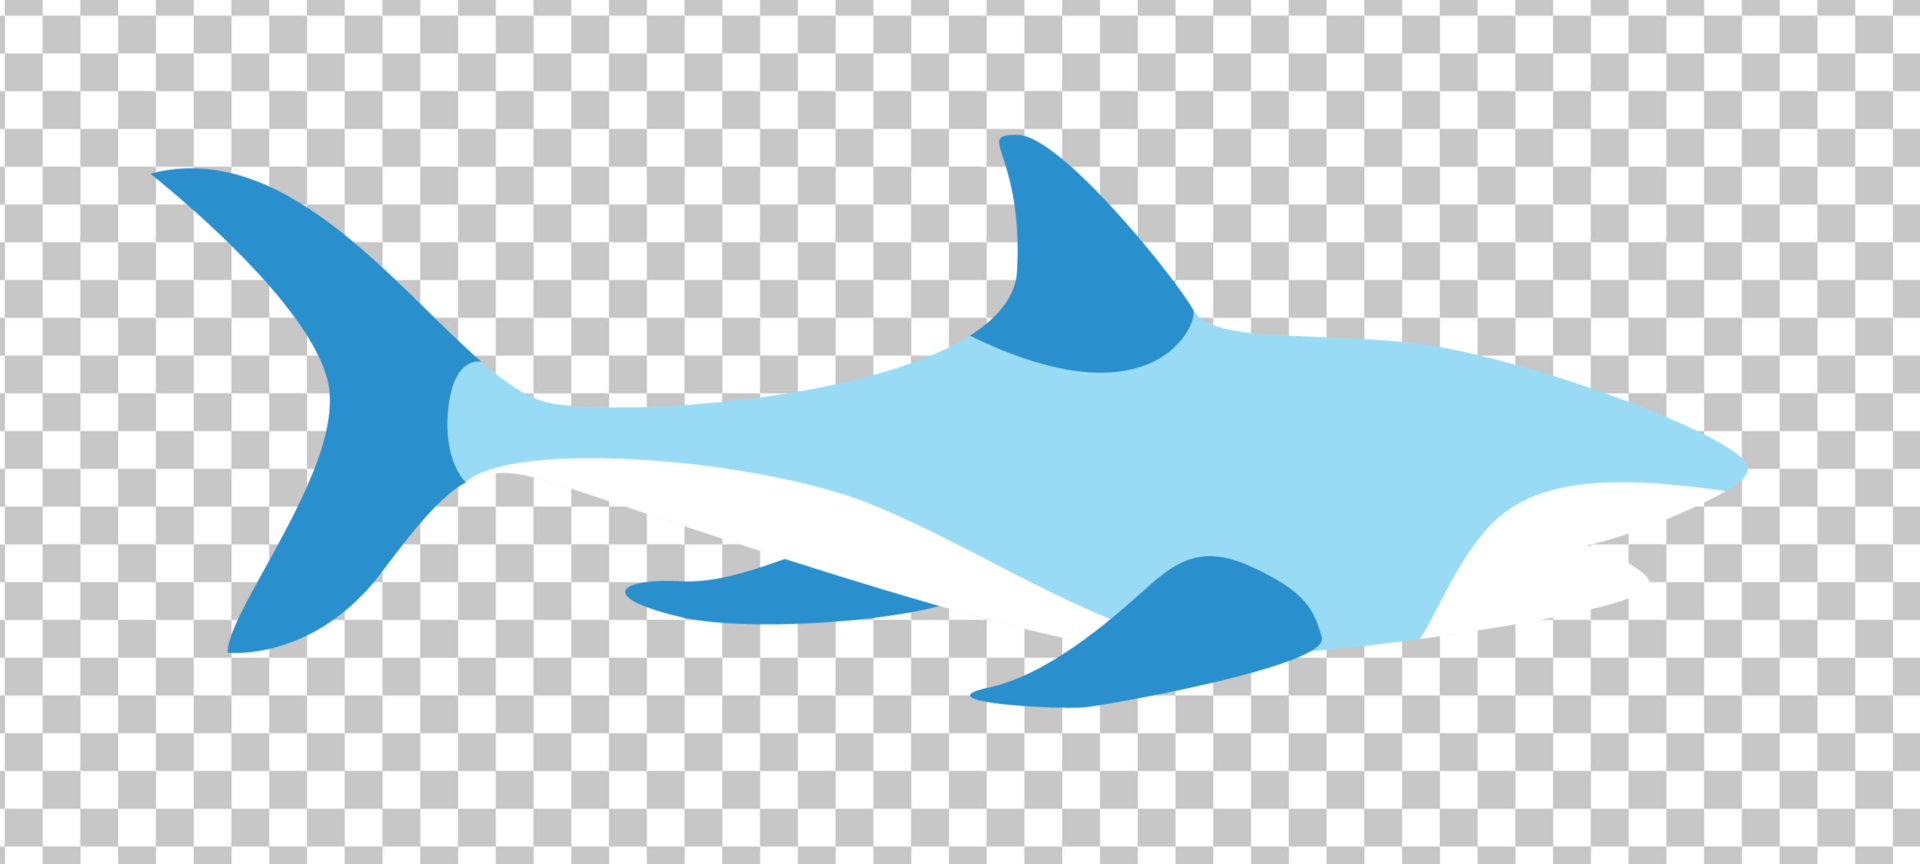 Shark Clipart, PNG Image, vector with Transparent Background | OngPng